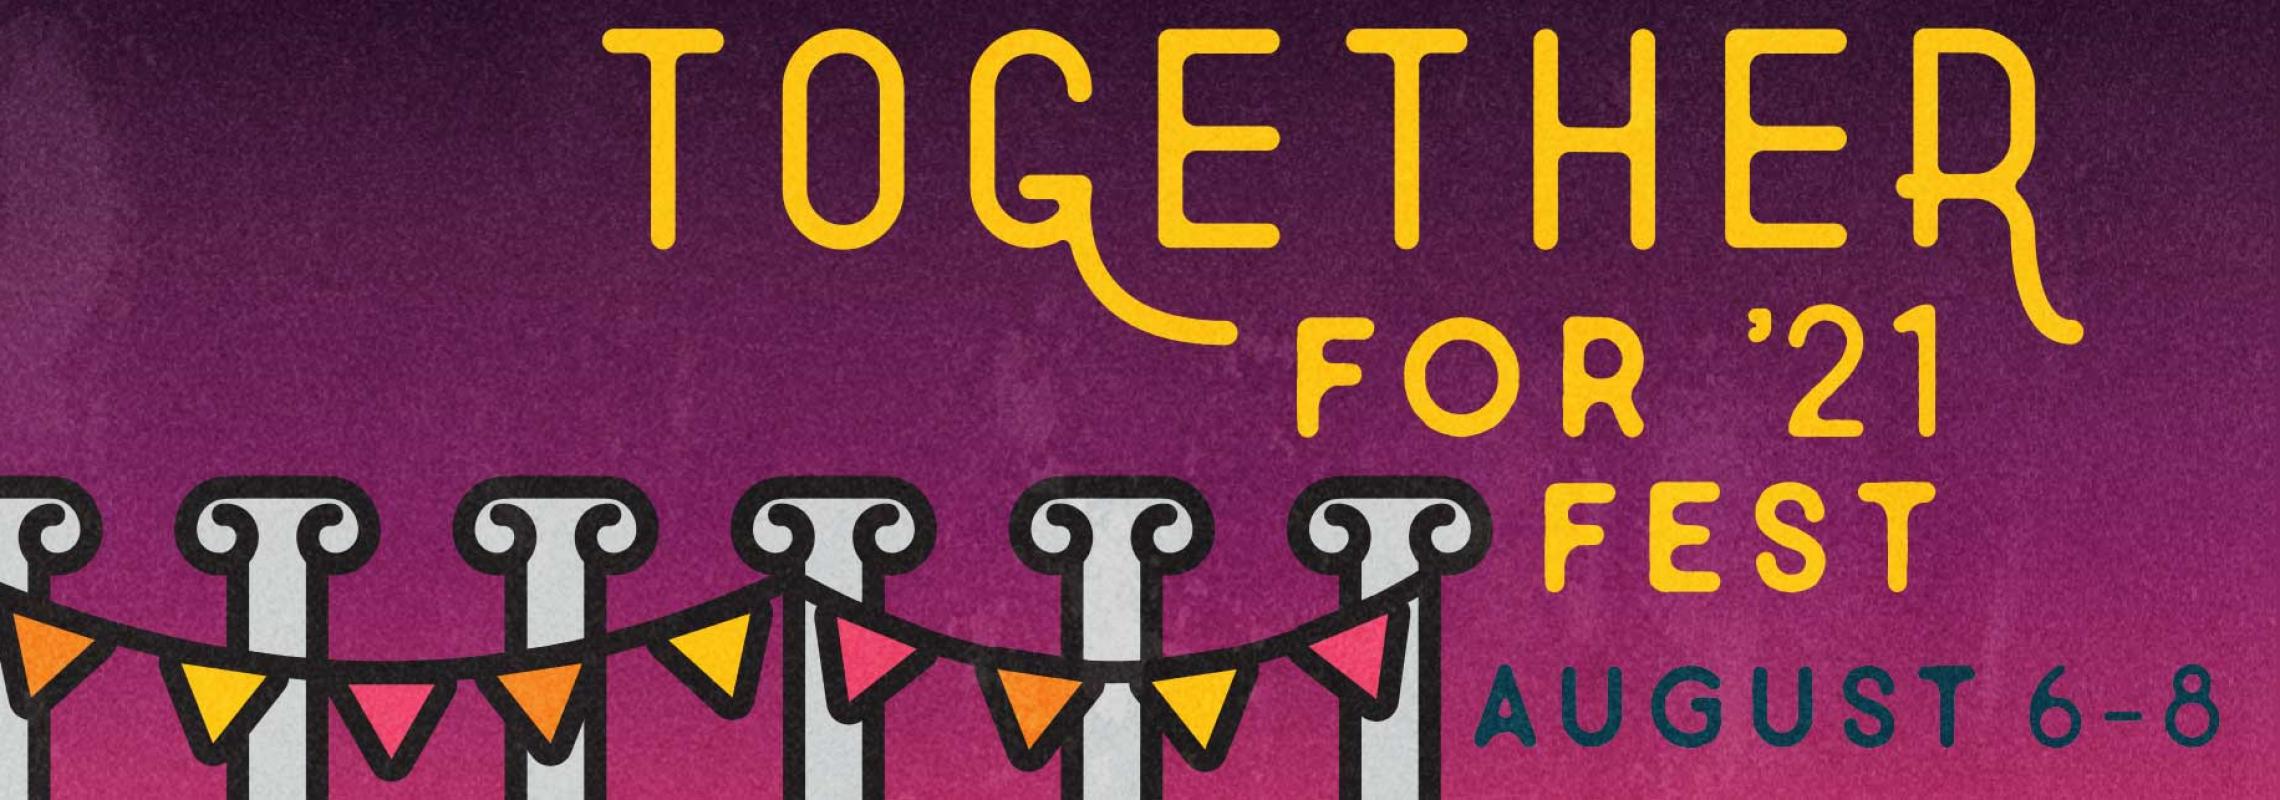 Together for '21 Fest August 6-8